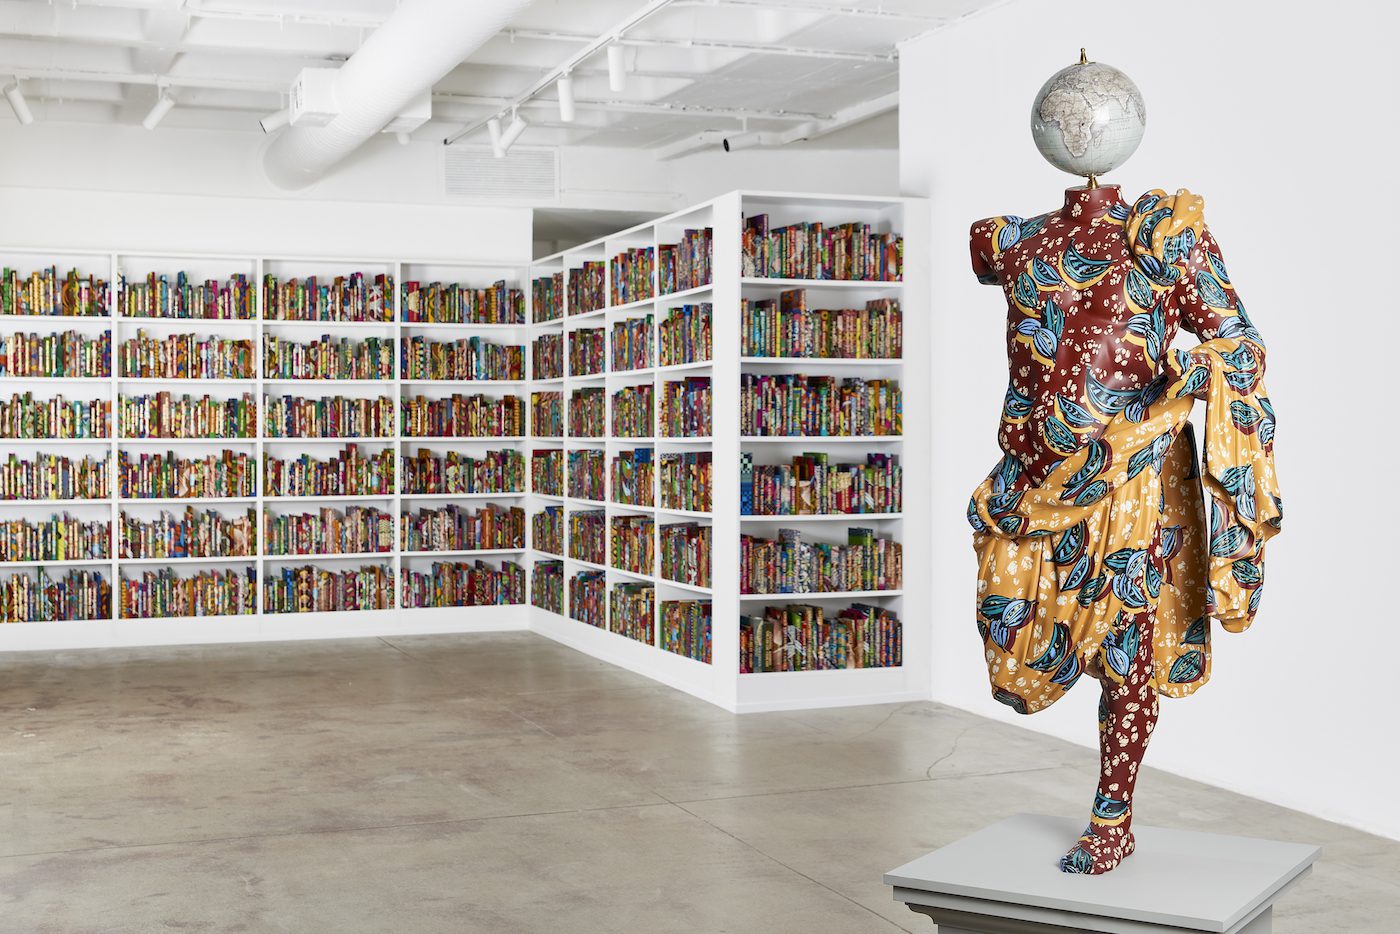 Installation view of Ruins Decorated by Yinka Shonibare MBE at Goodman Gallery Johannesburg, 2018. Courtesy Goodman Gallery.